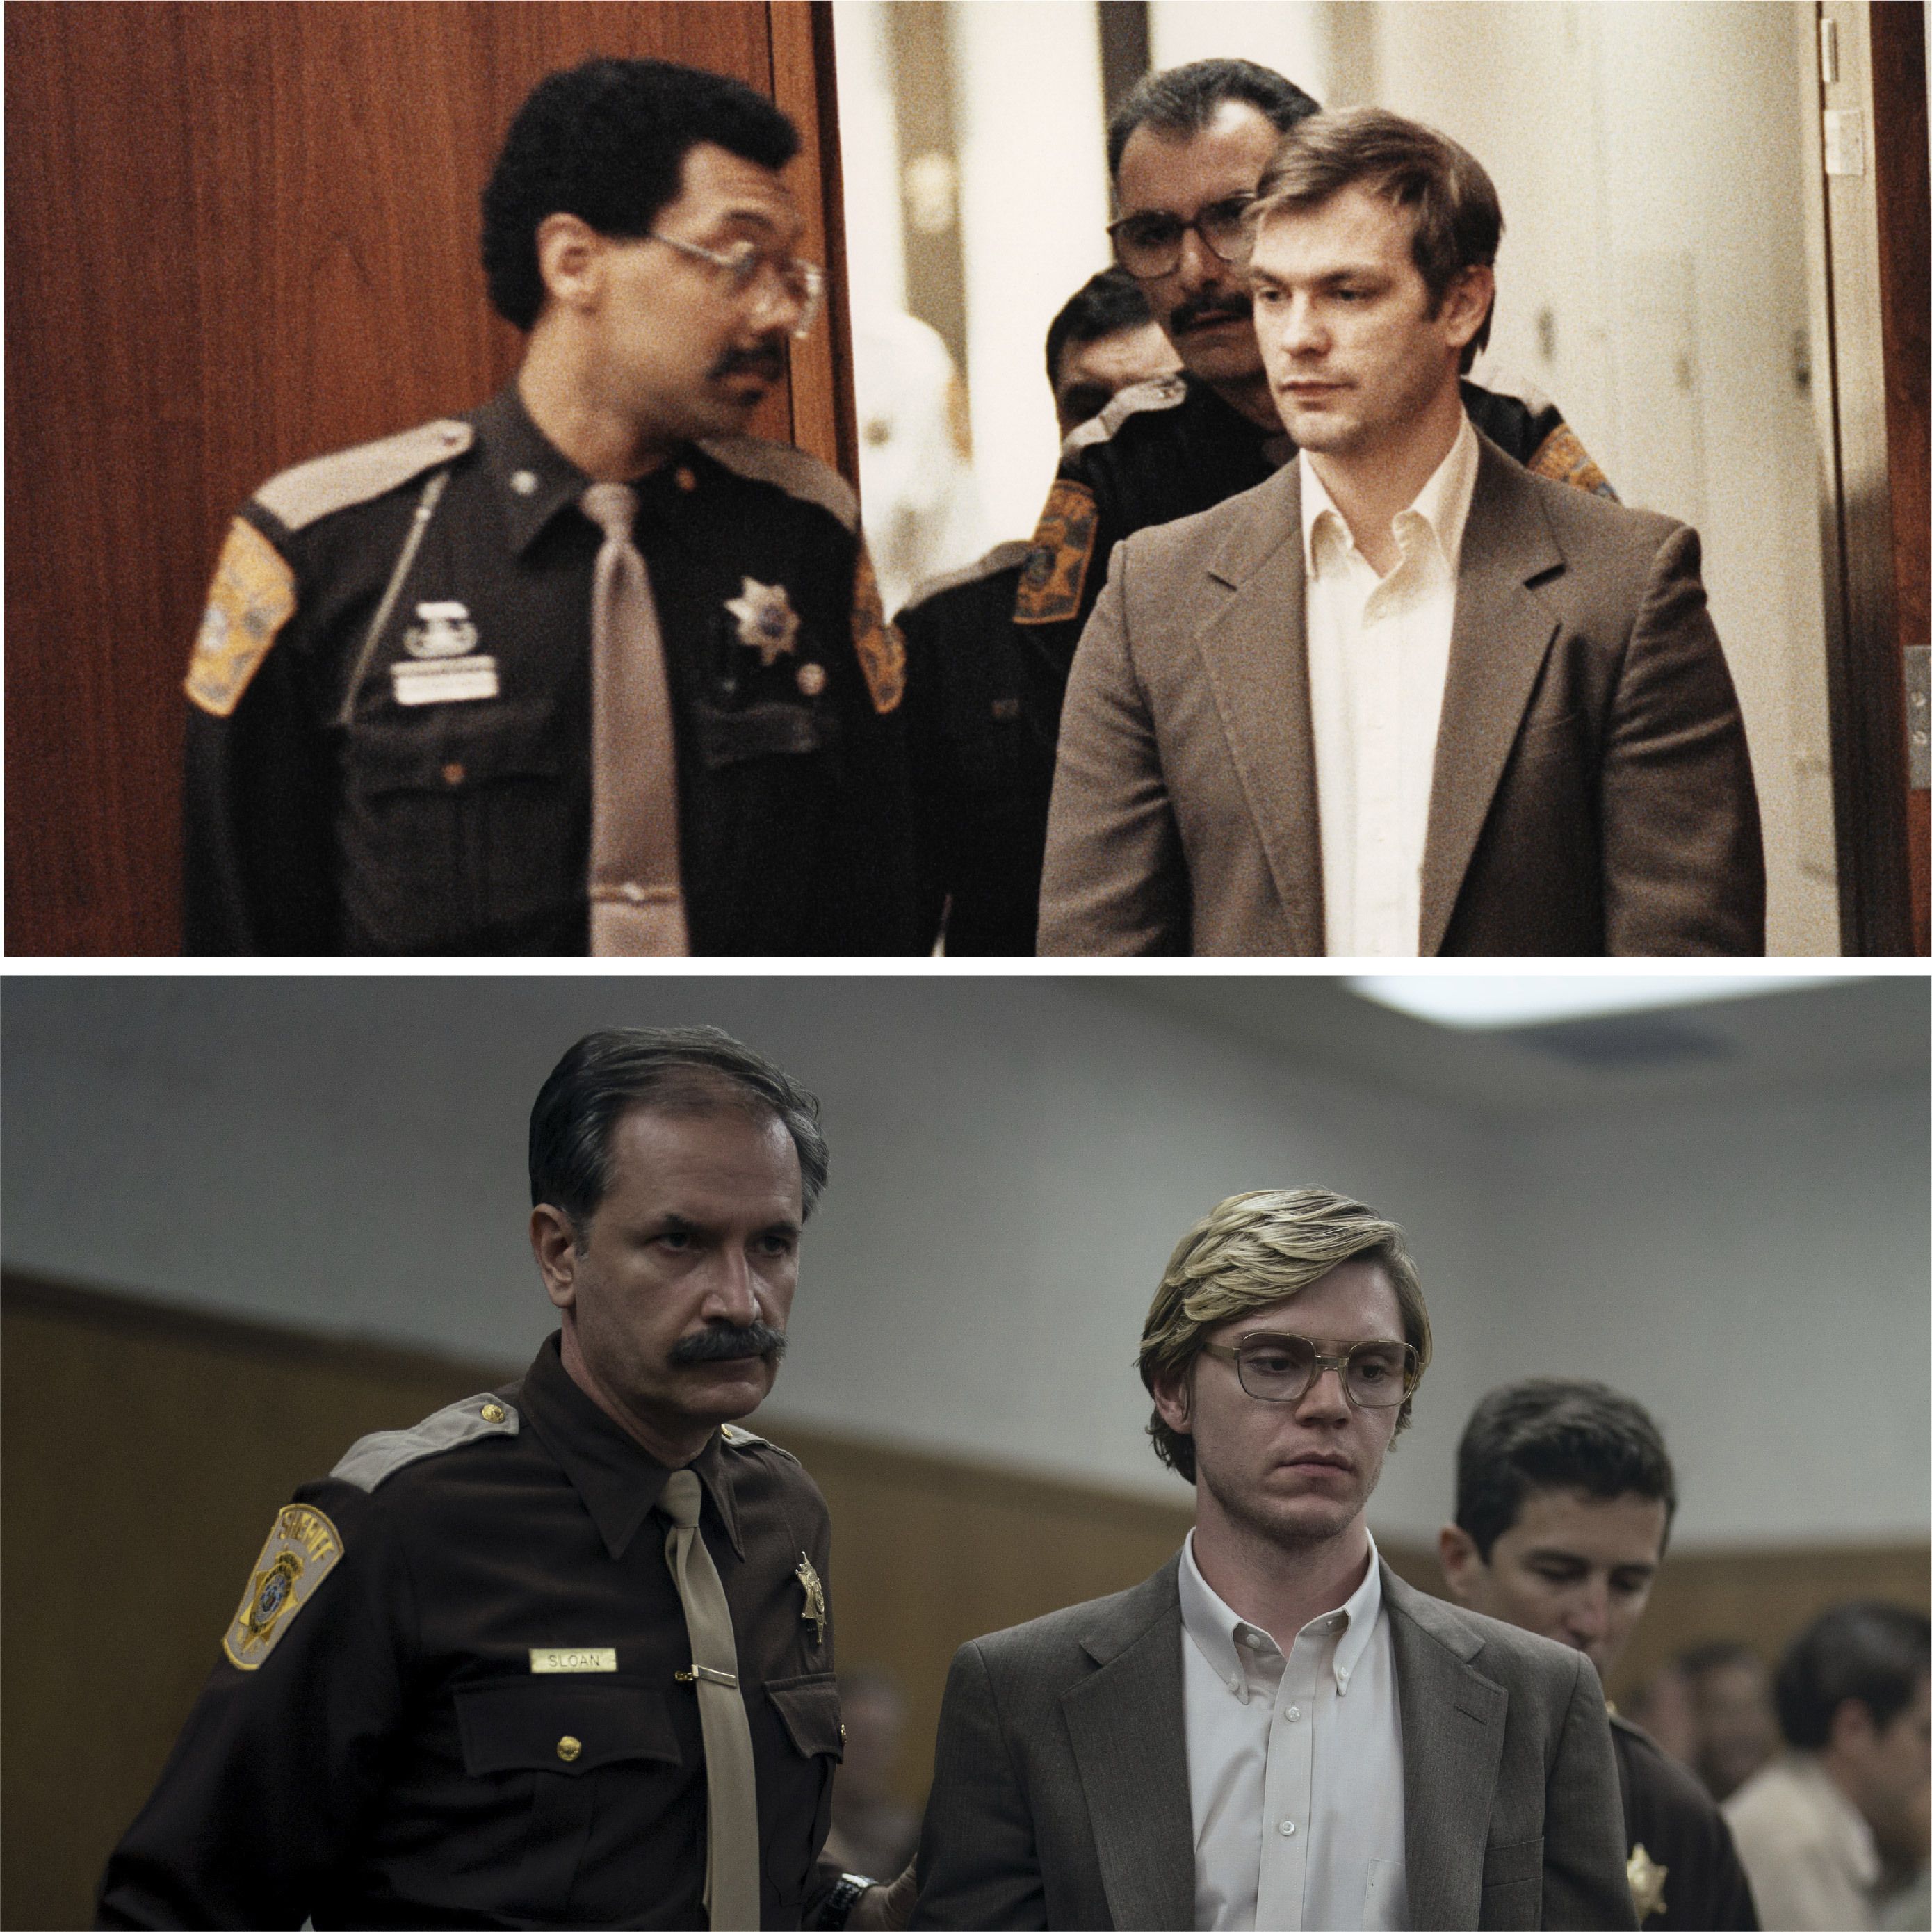 The True Story of Jeffrey Dahmer's Crimes From Netflix's 'Monster